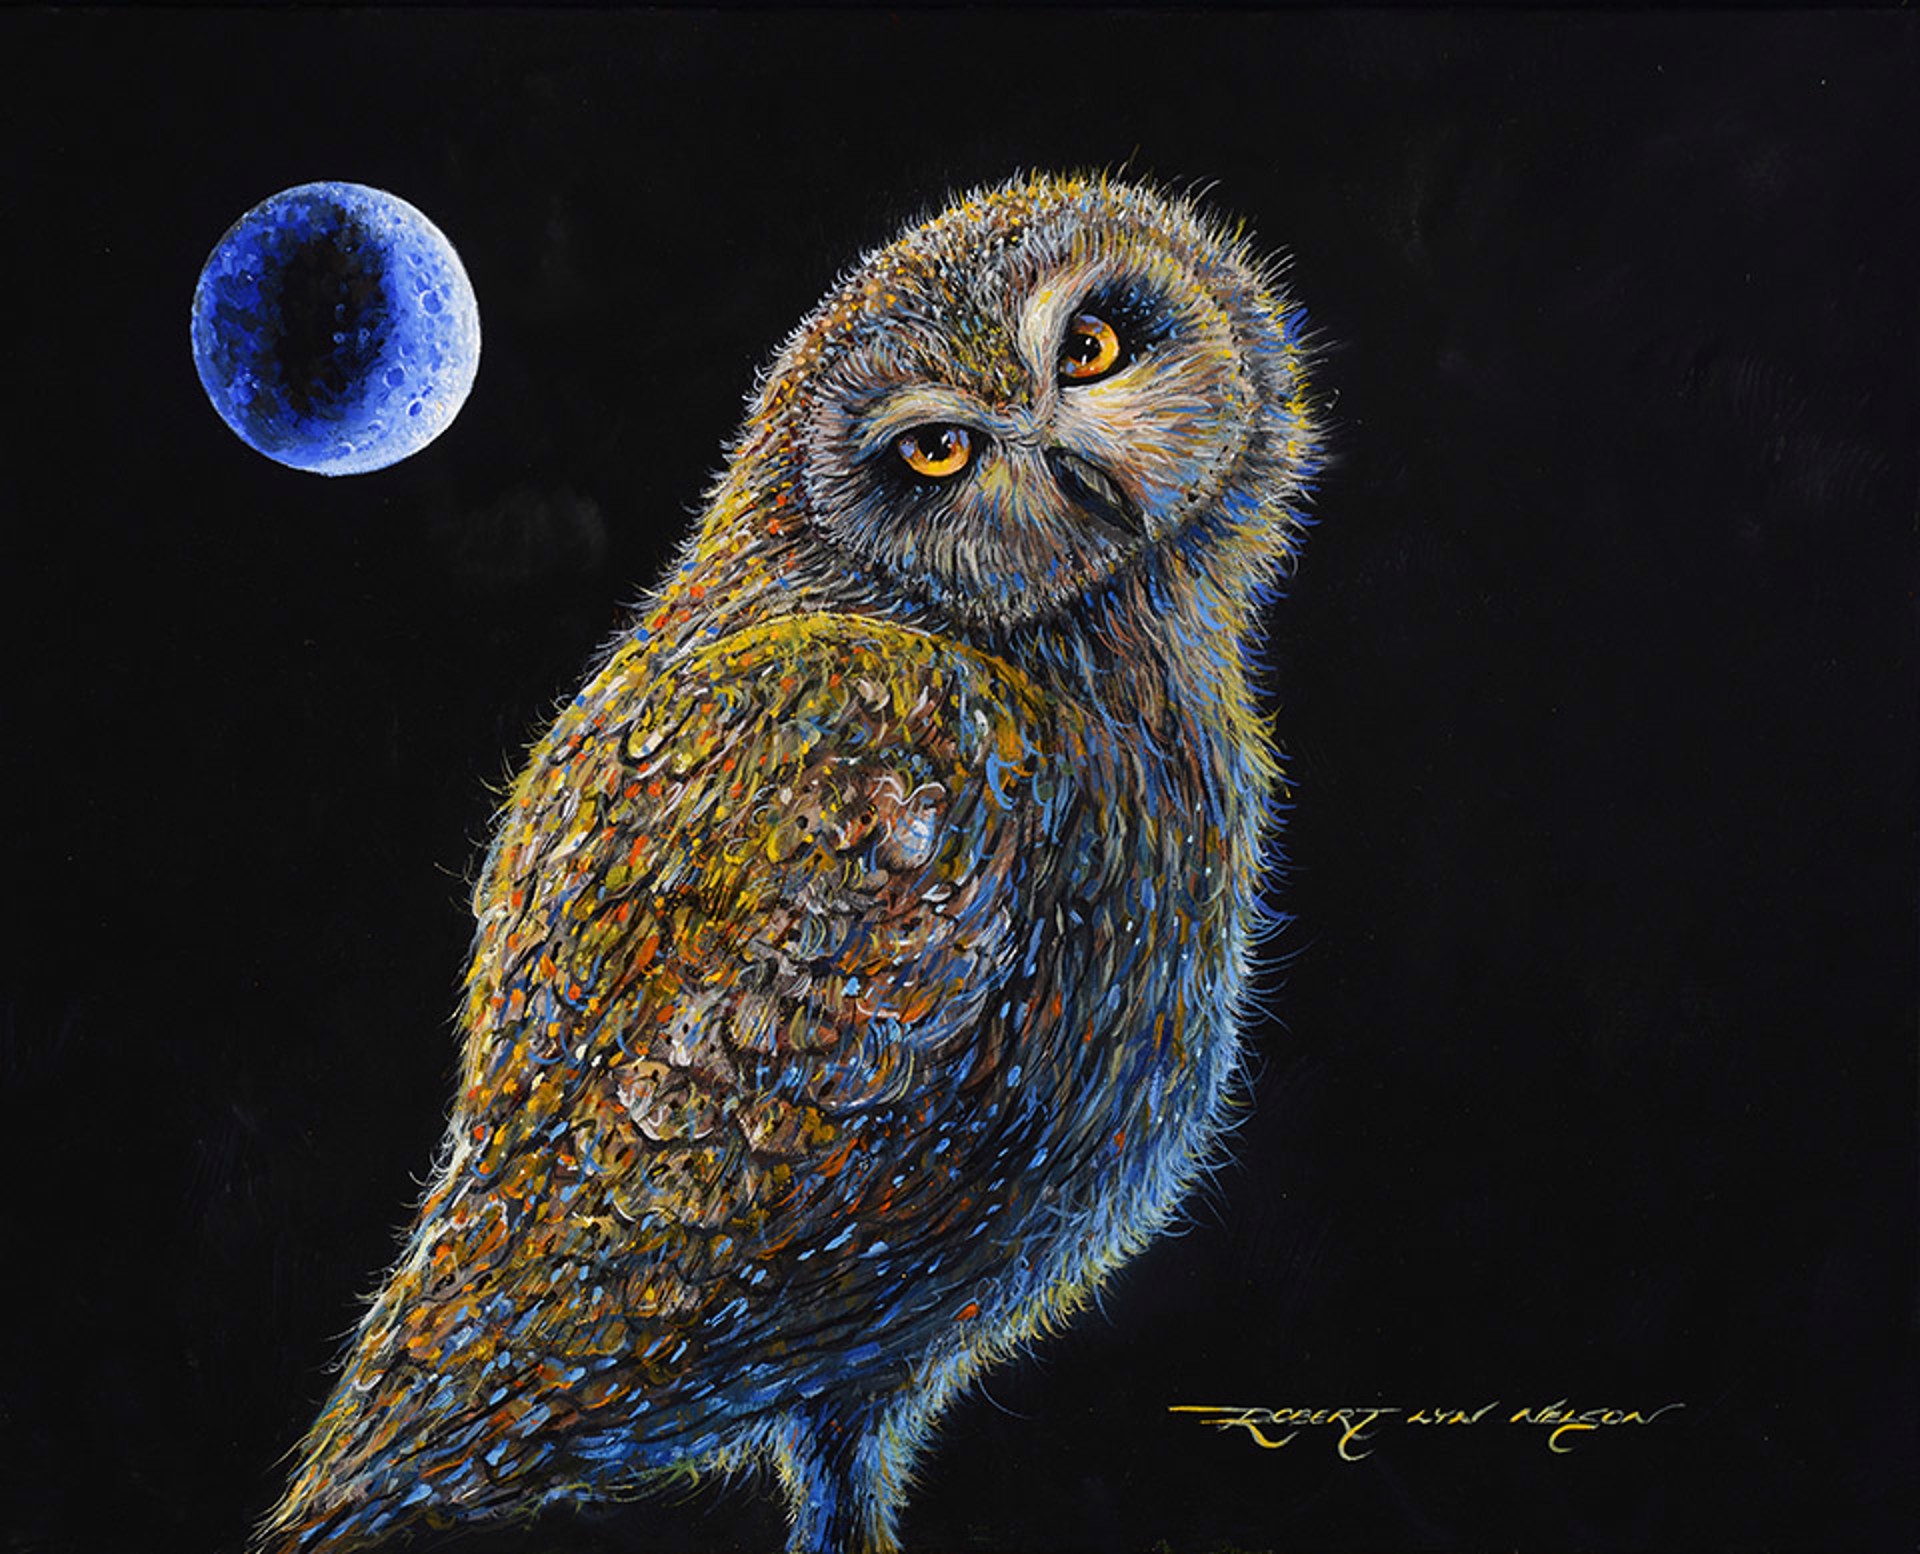 Thalo Moon - Owl by Robert Lyn Nelson